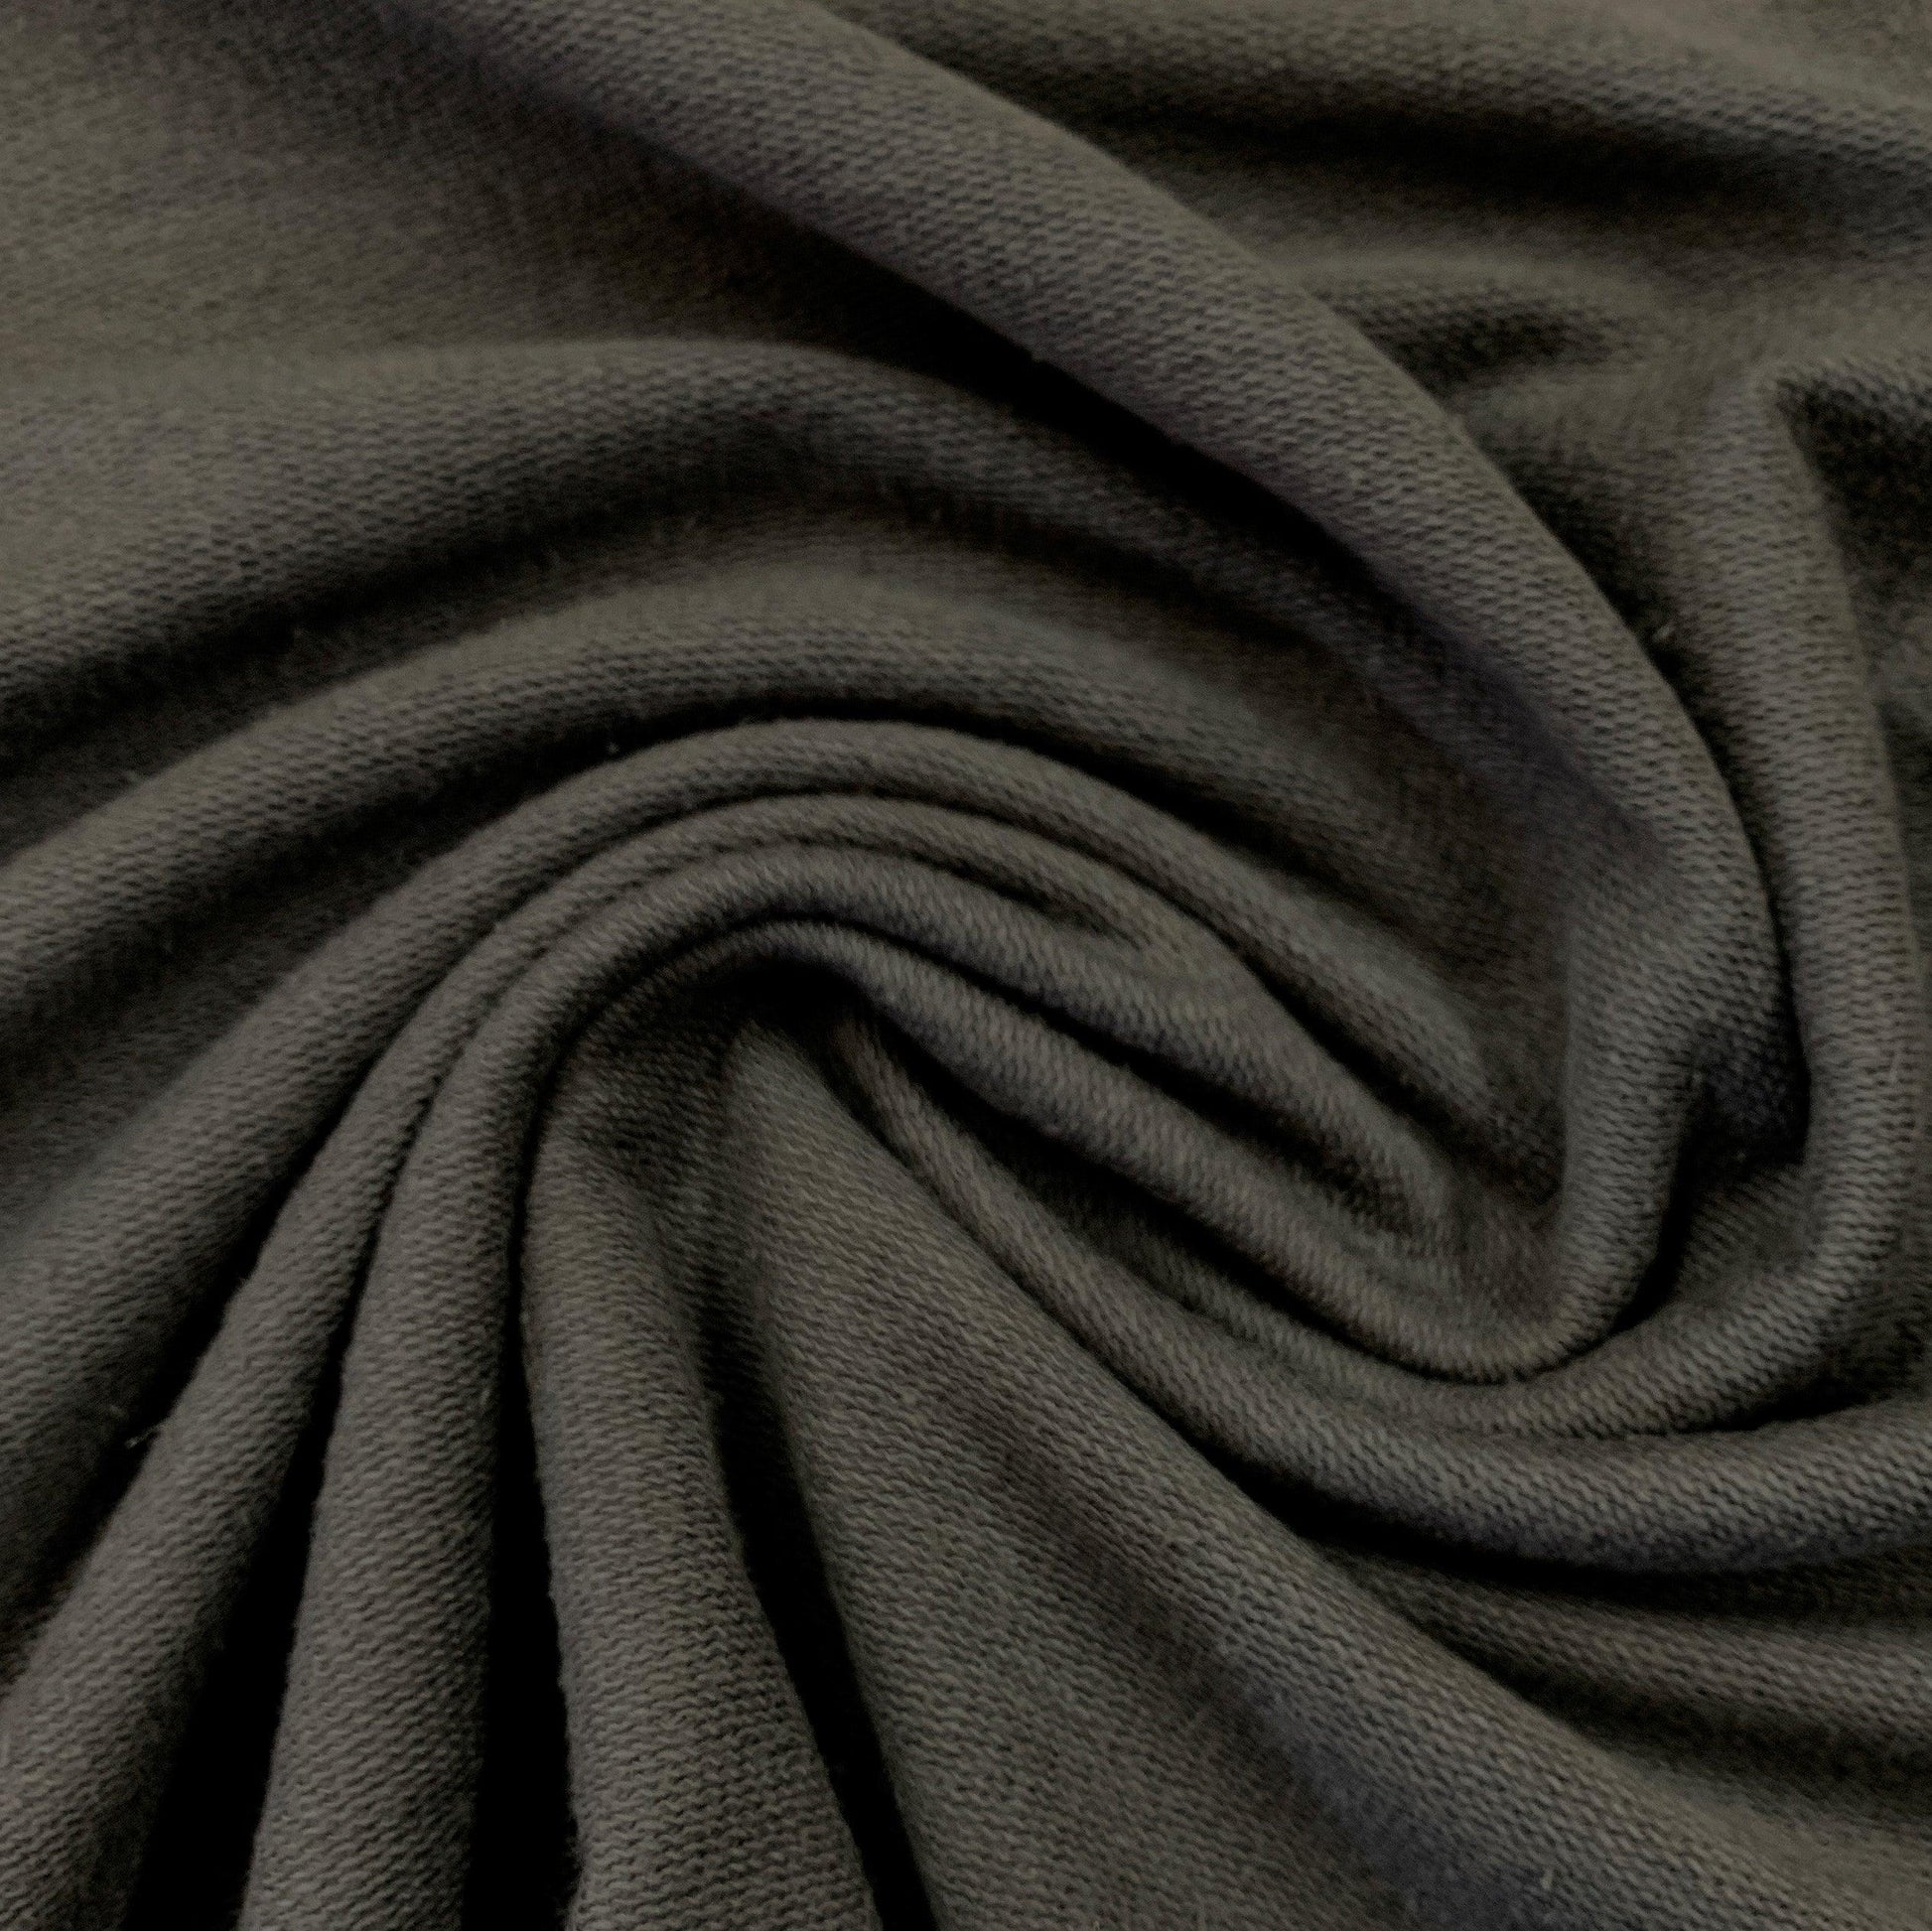 Graphite Medium Weight Organic Cotton French Terry Fabric - Grown in the USA